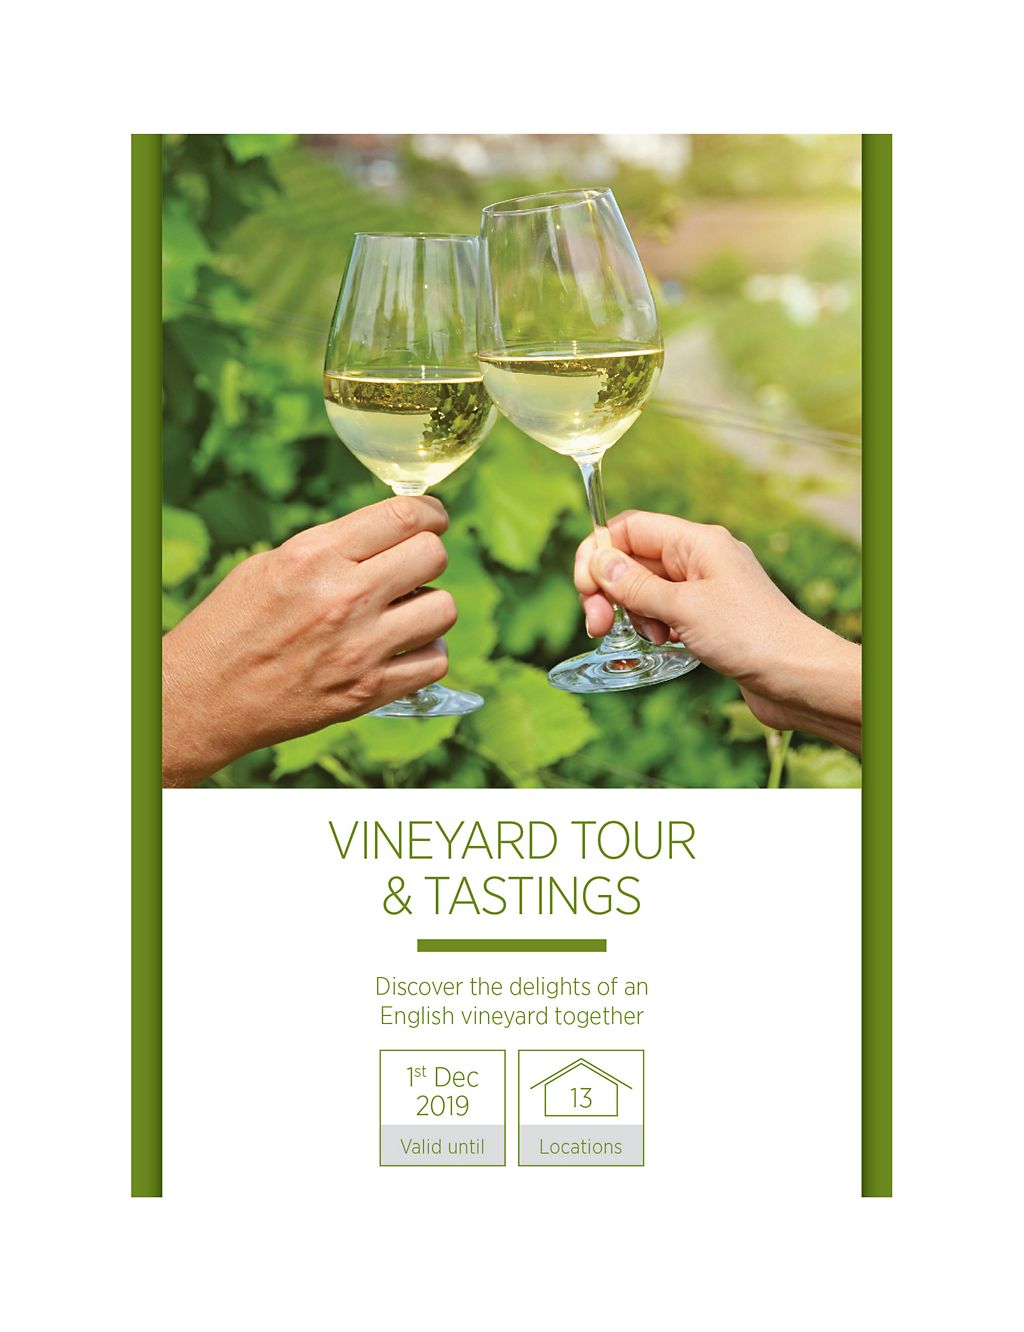 Vineyard Tour & Tastings for Two - Gift Experience Voucher 3 of 8